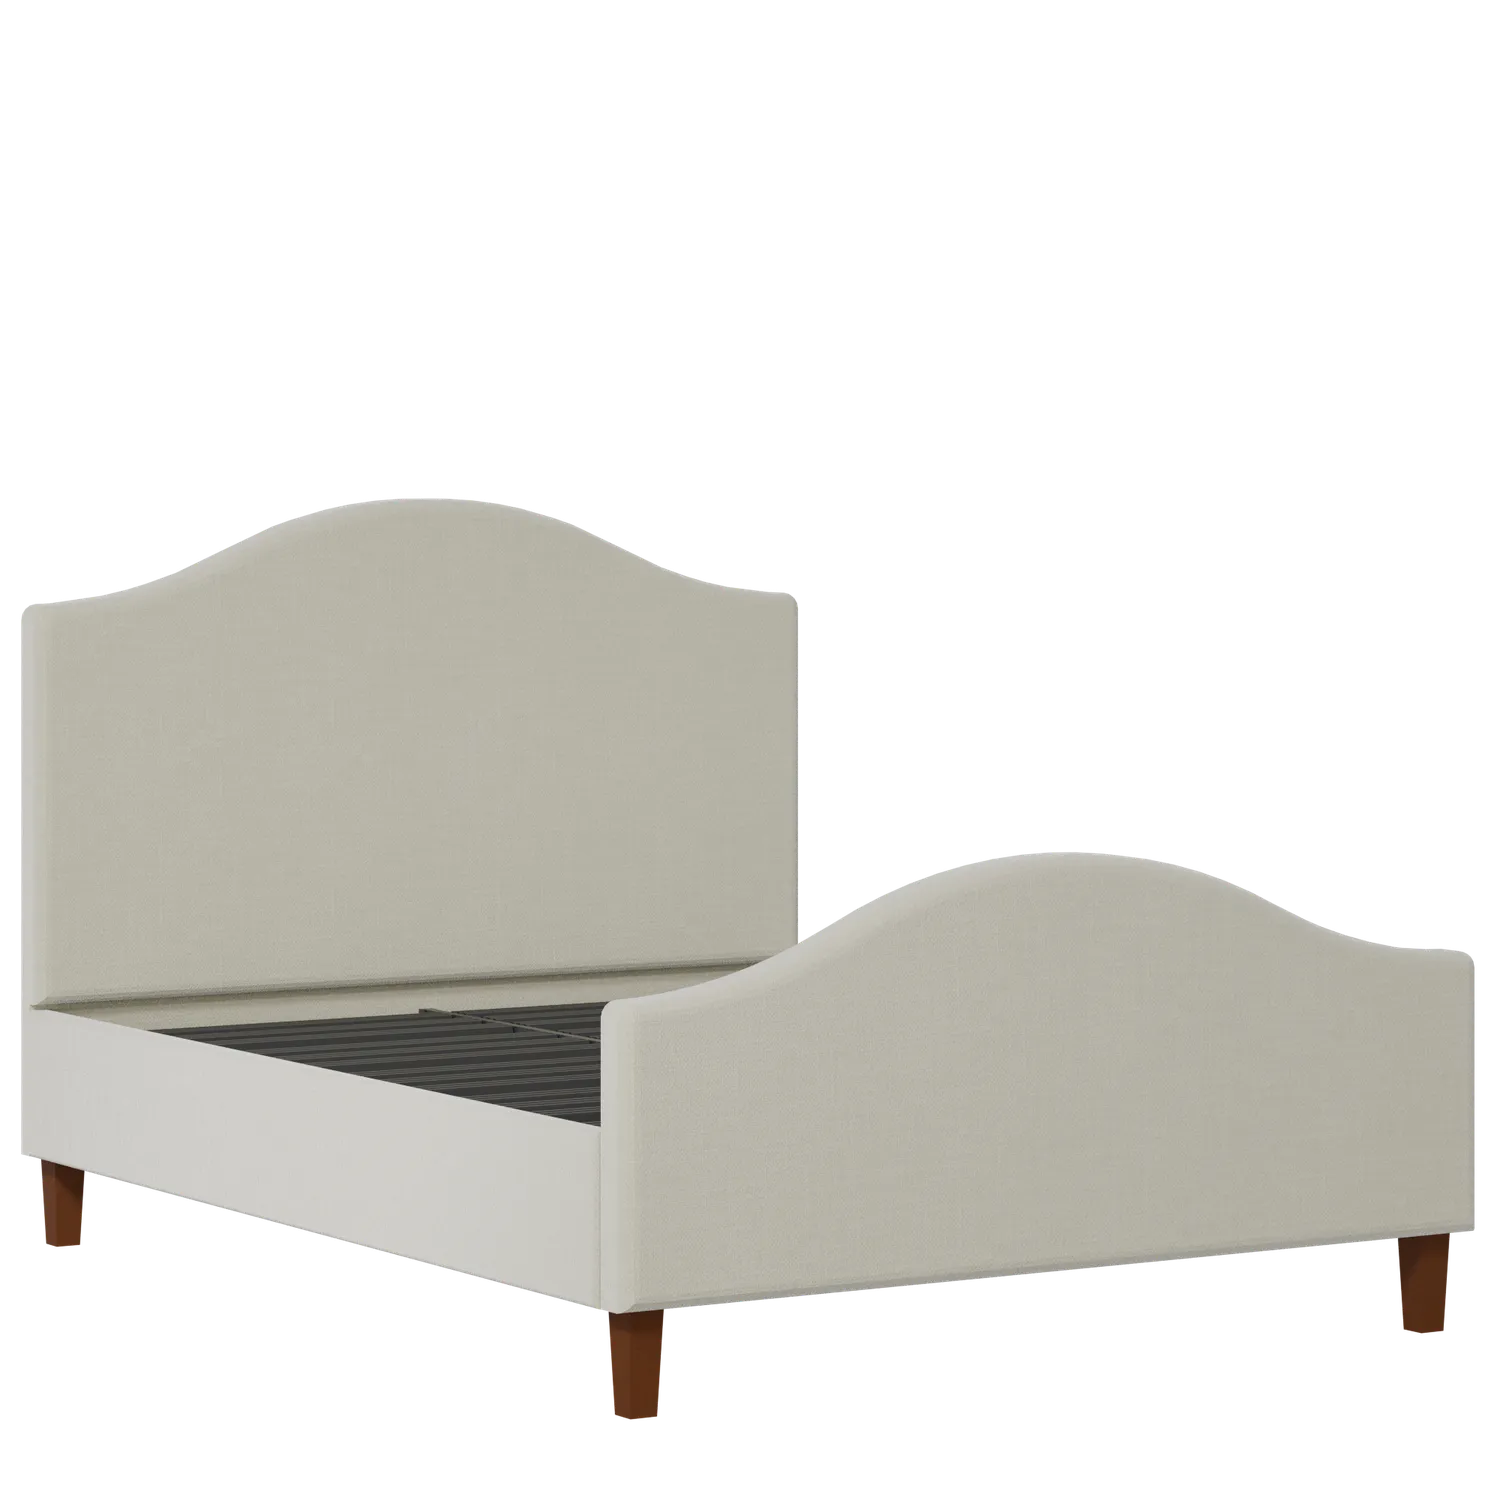 Burley upholstered bed in oatmeal fabric